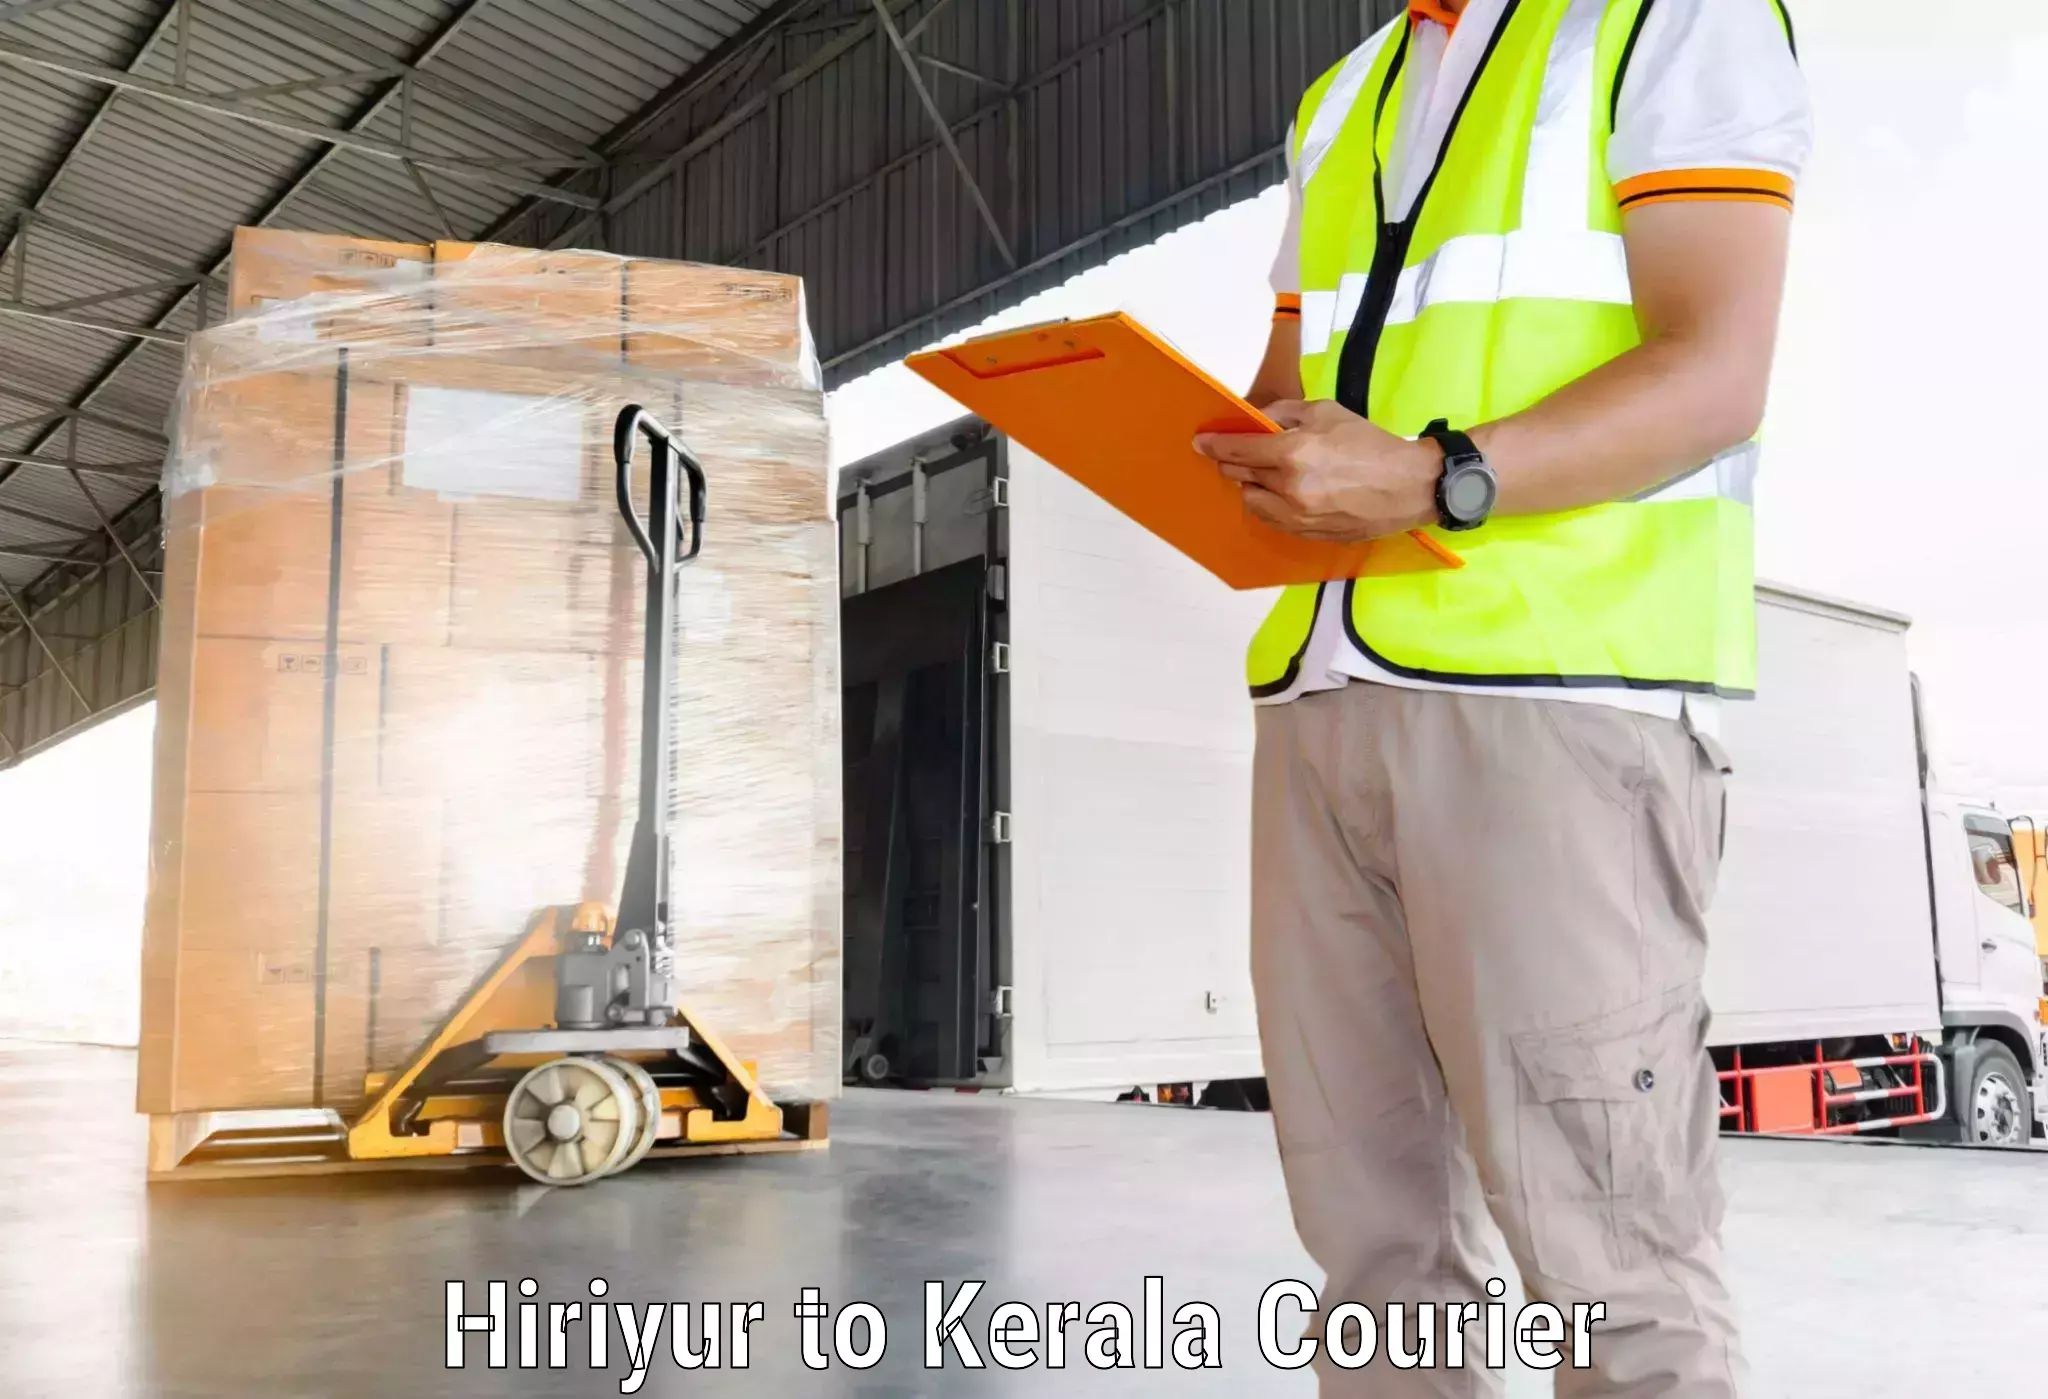 Reliable parcel services Hiriyur to Taliparamba